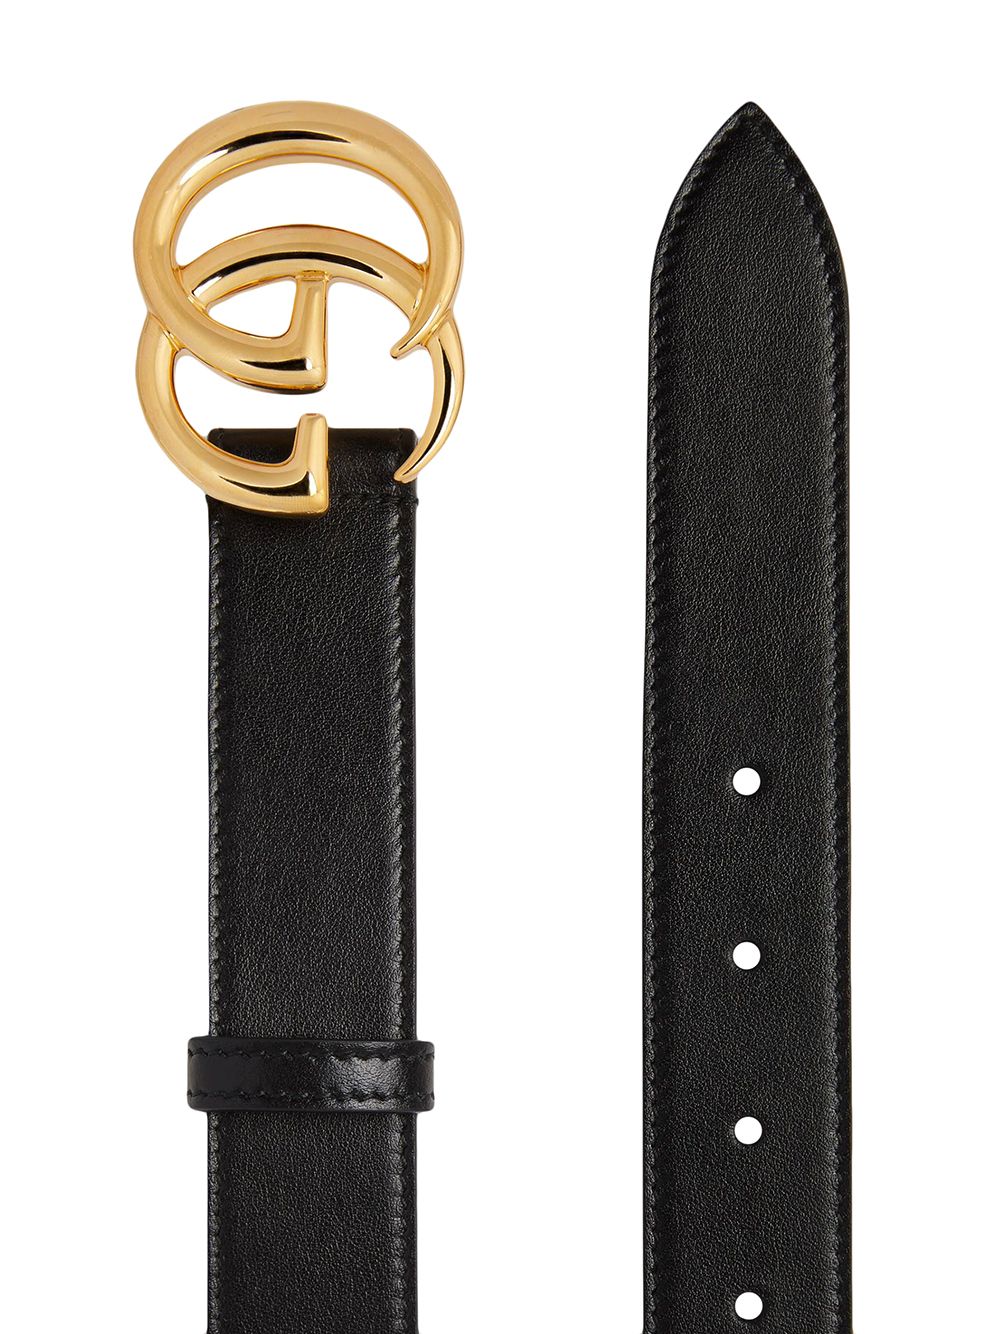 GucciGG Marmont belt at Fashion Clinic